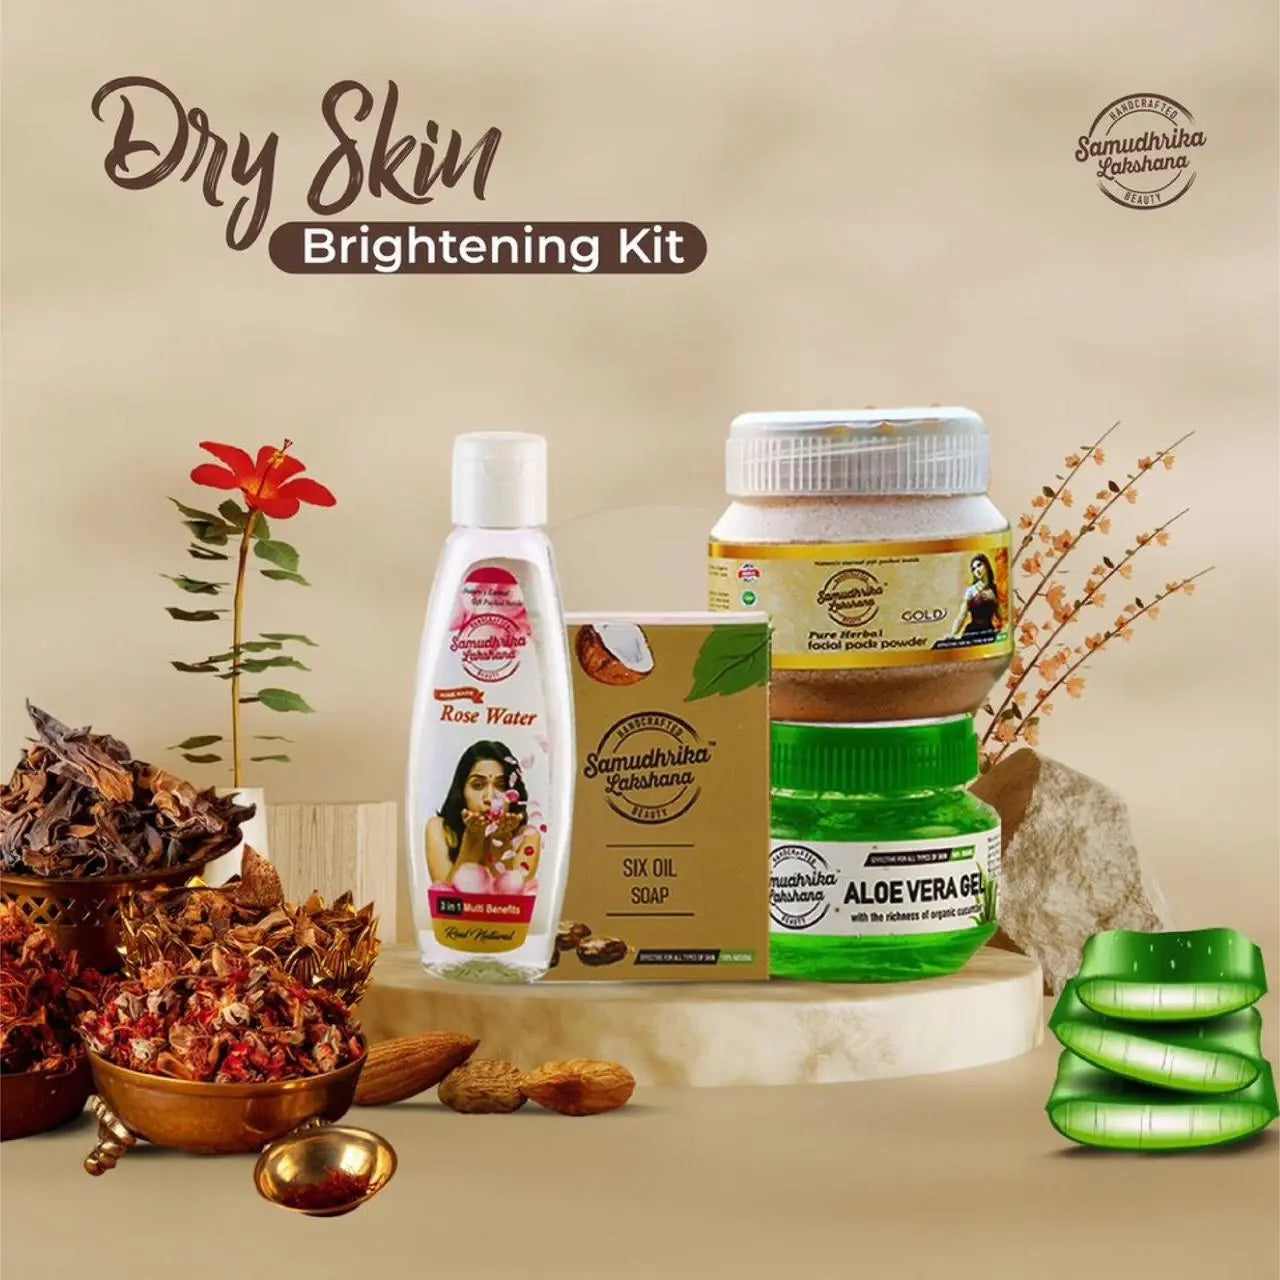 Dry skin brightening combo for herbal products